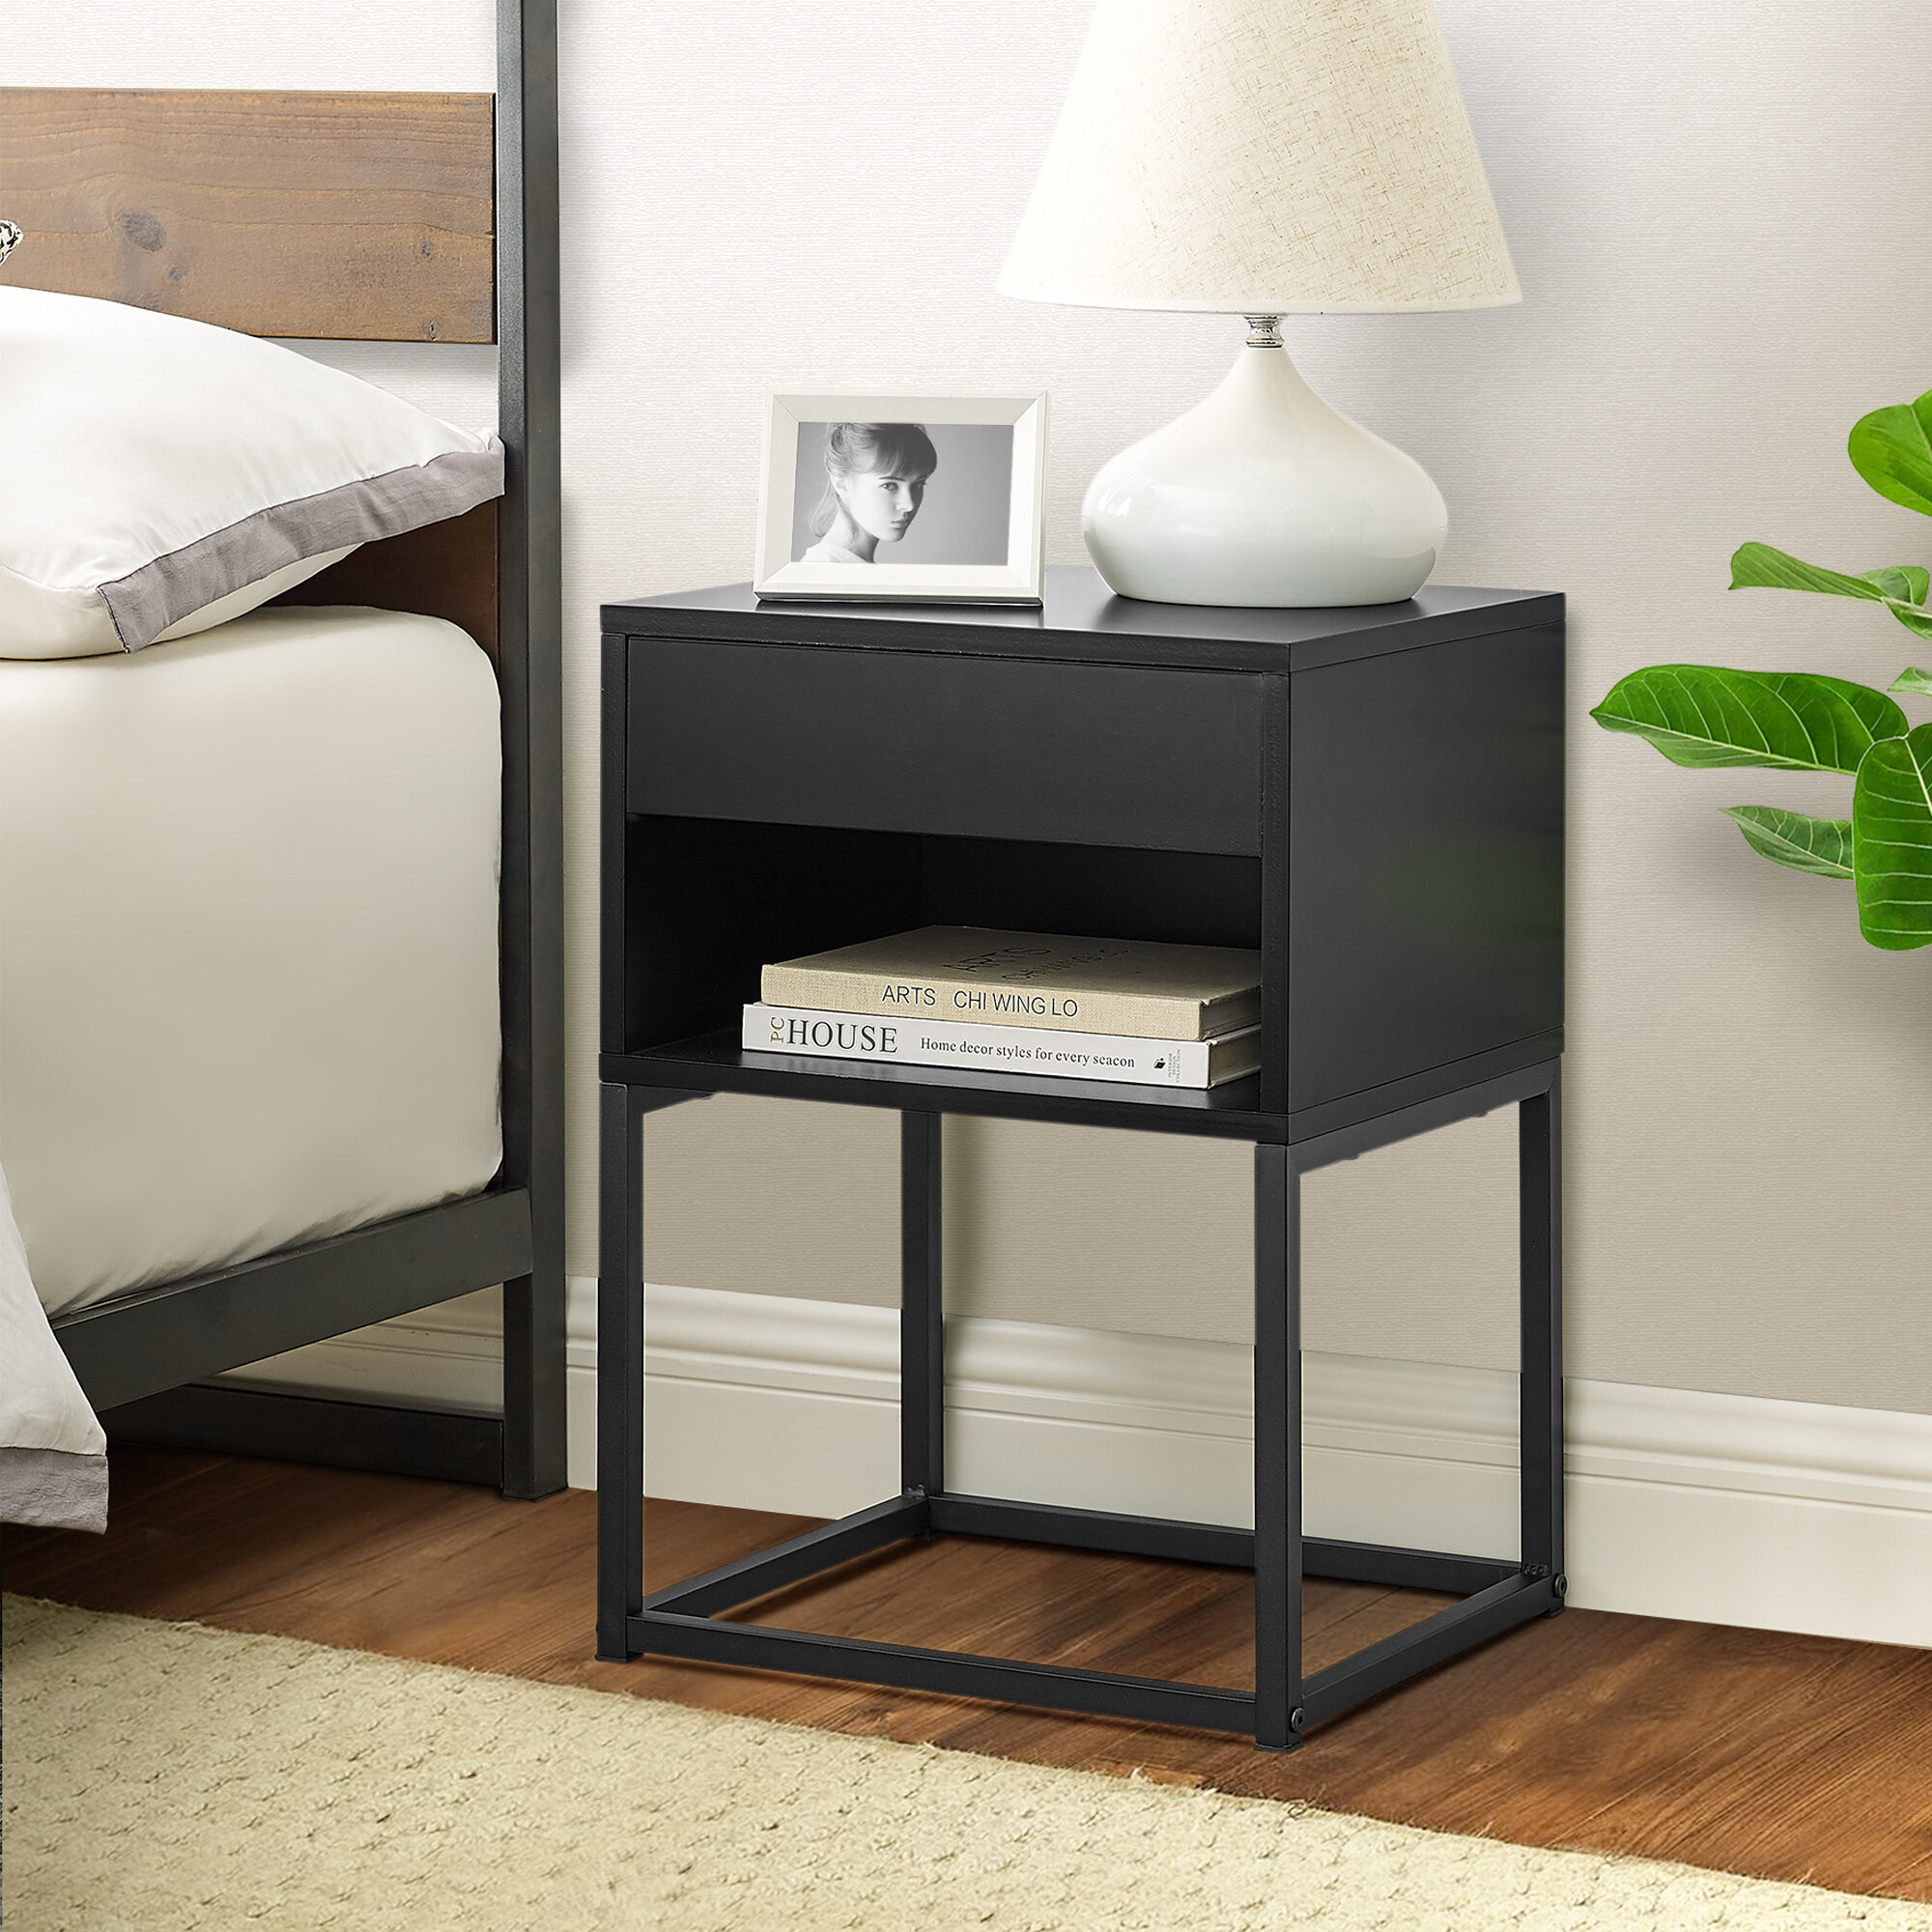 End Table with 2 Shelves - small side table, minimalist nightstand